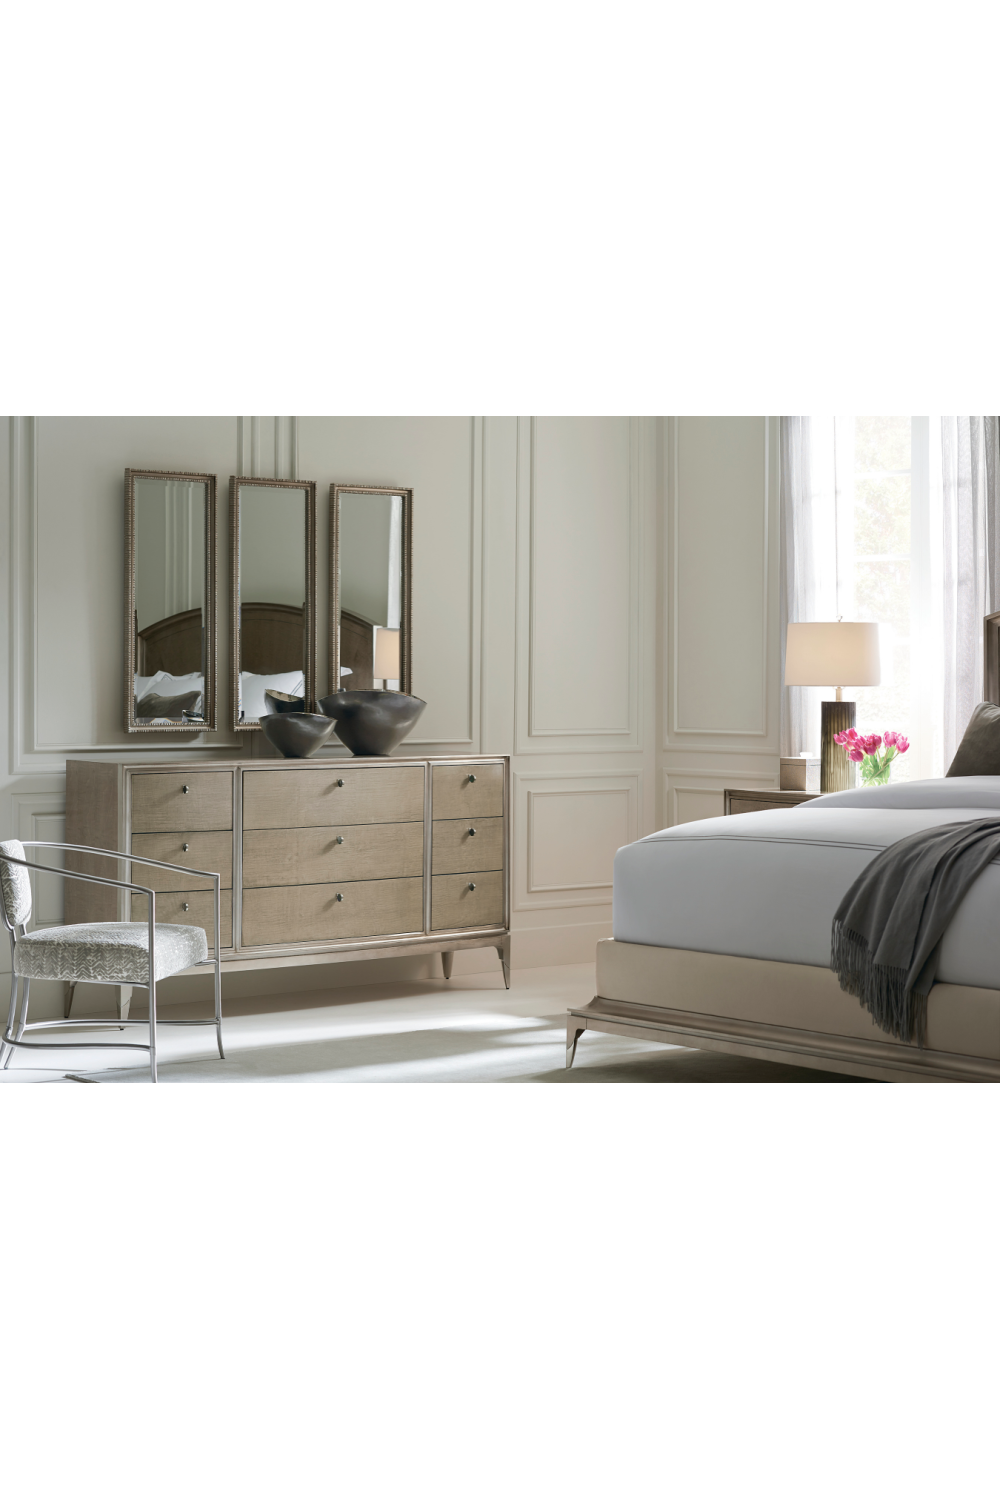 Metallic Outlined King Bed | Caracole Rise To The Occasion | Oroa.com